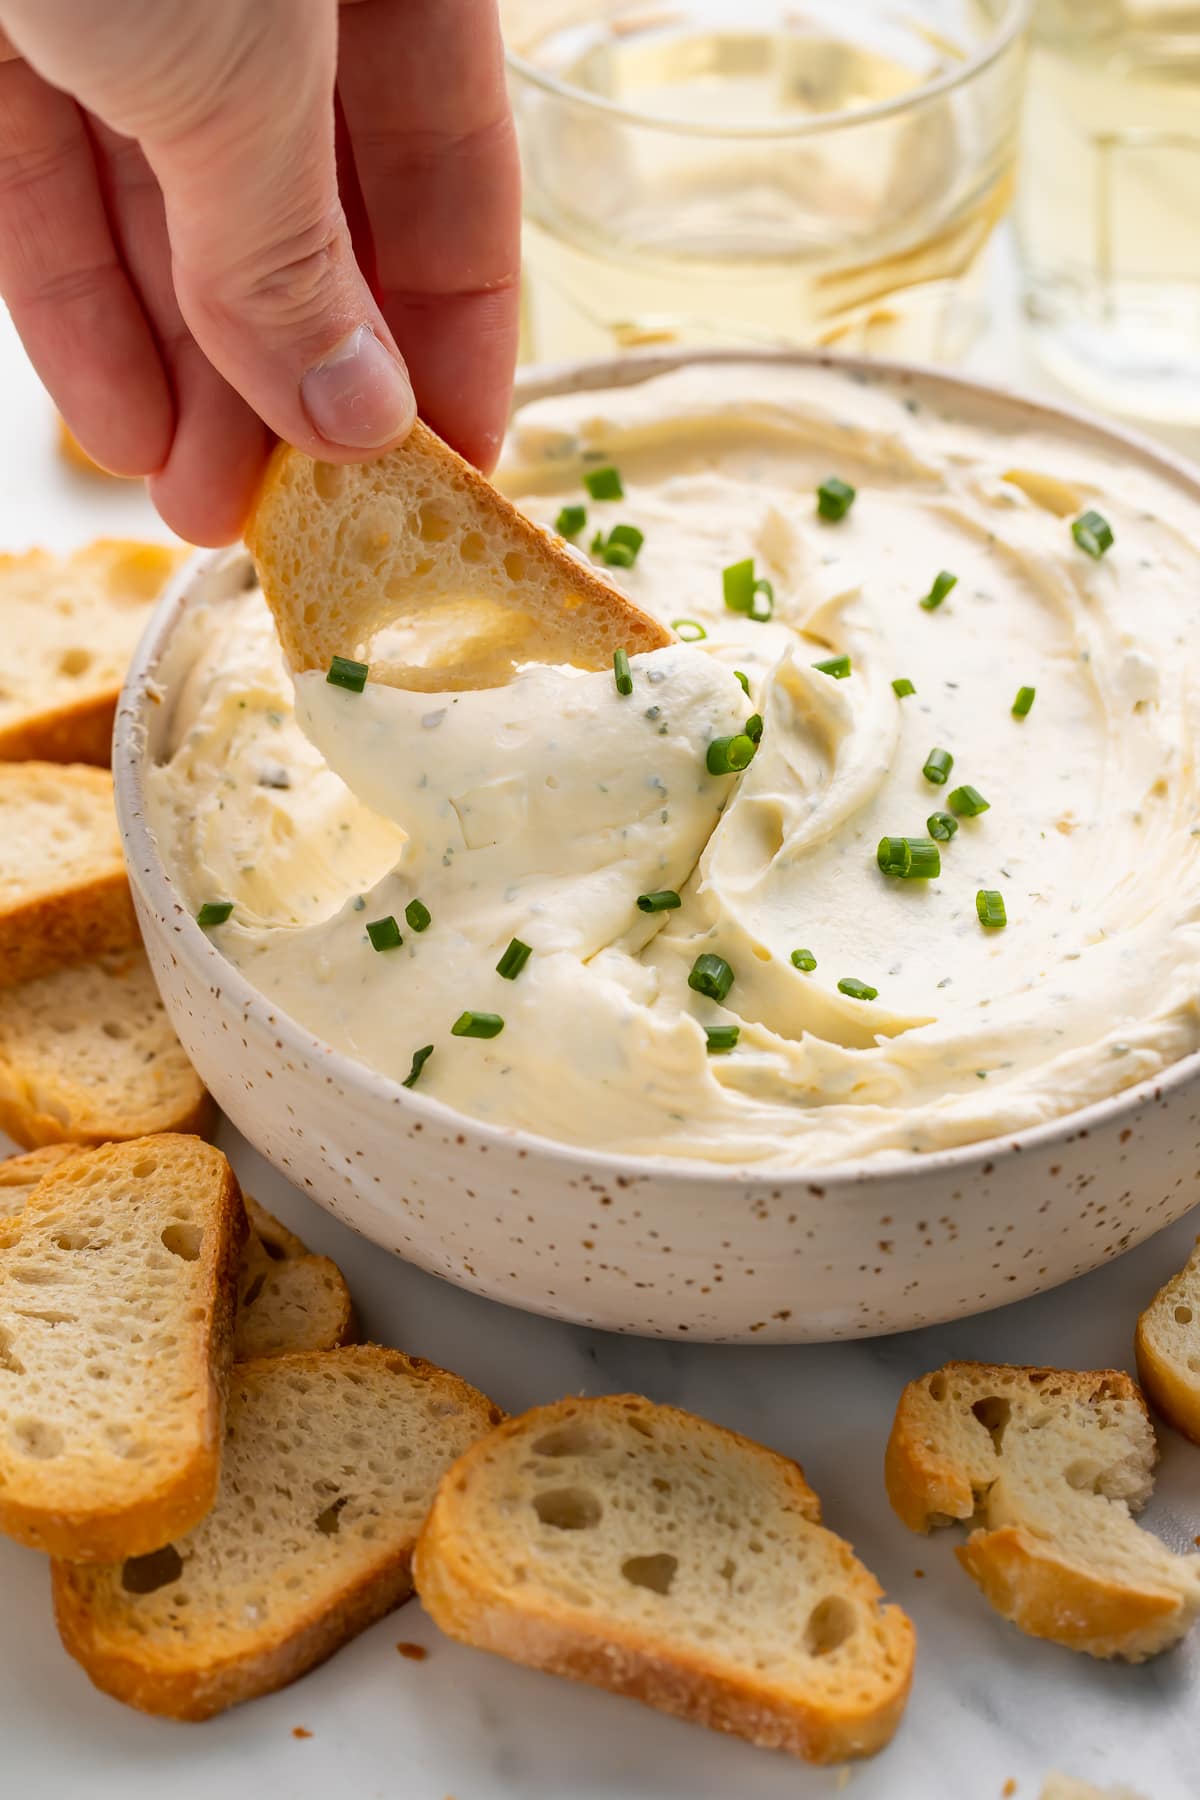 A white woman's hand dipping a piece of crostini into a bowl of creamy homemade boursin cheese.